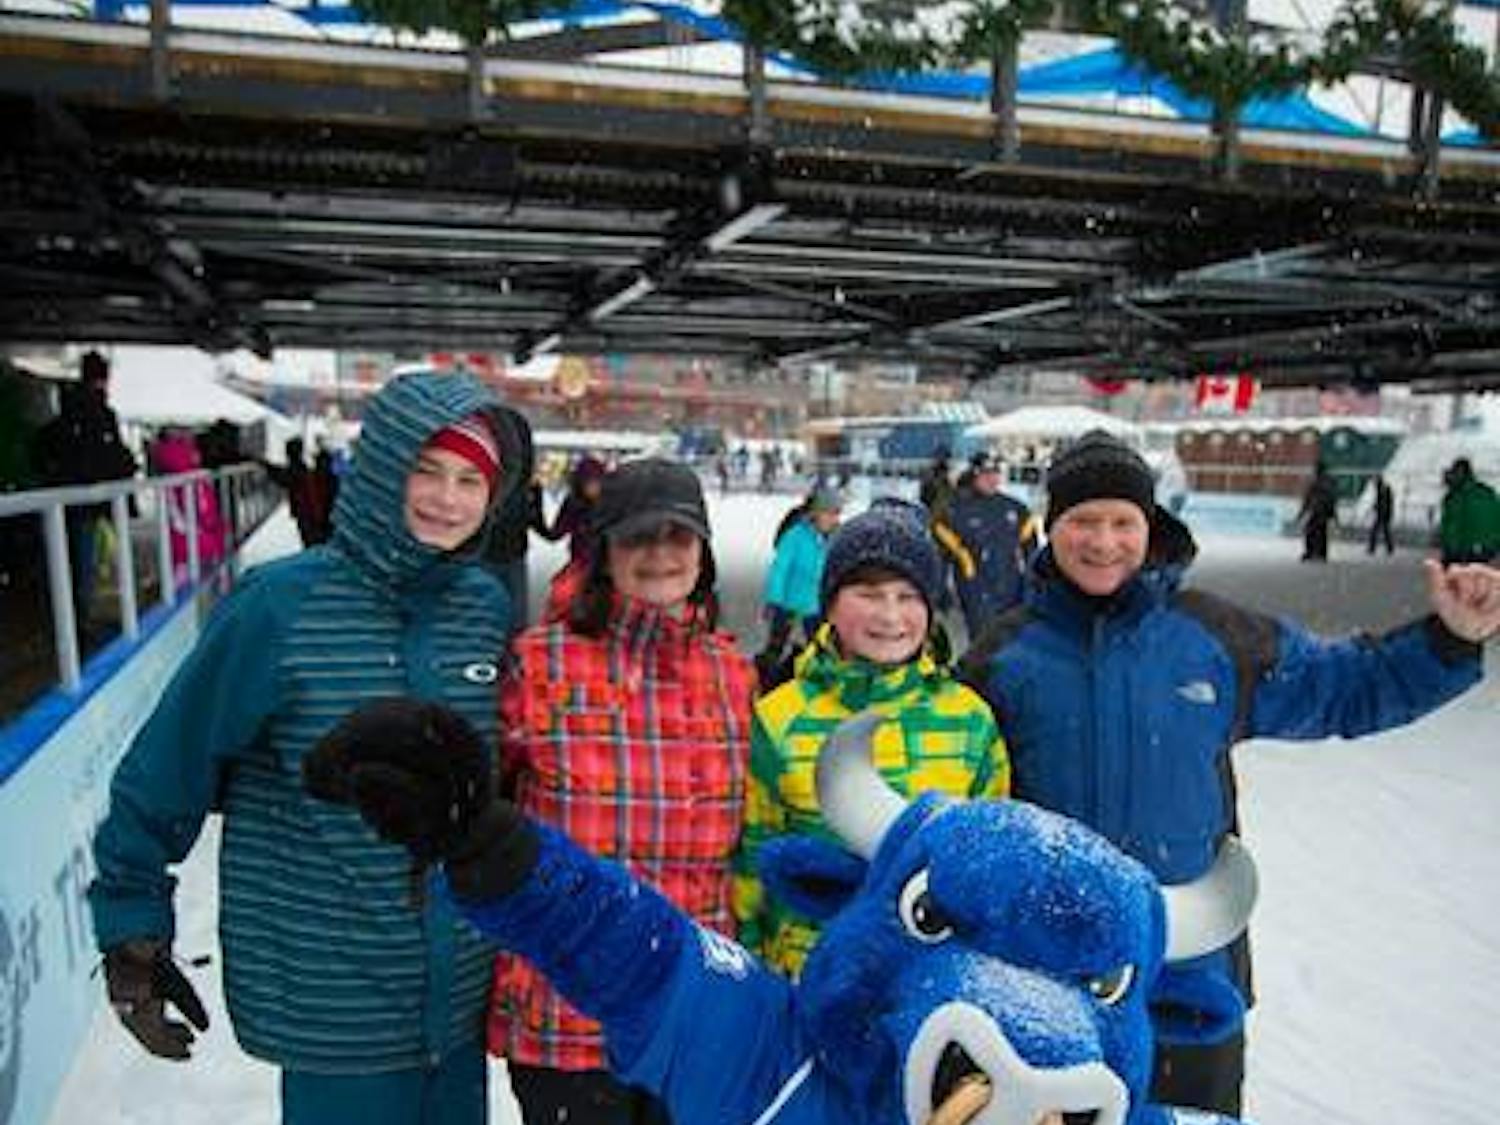 UB Alumni Association helped host an event at Canalside last winter. All UB alumni will soon be able to attend all Association events without having to pay a membership fee.